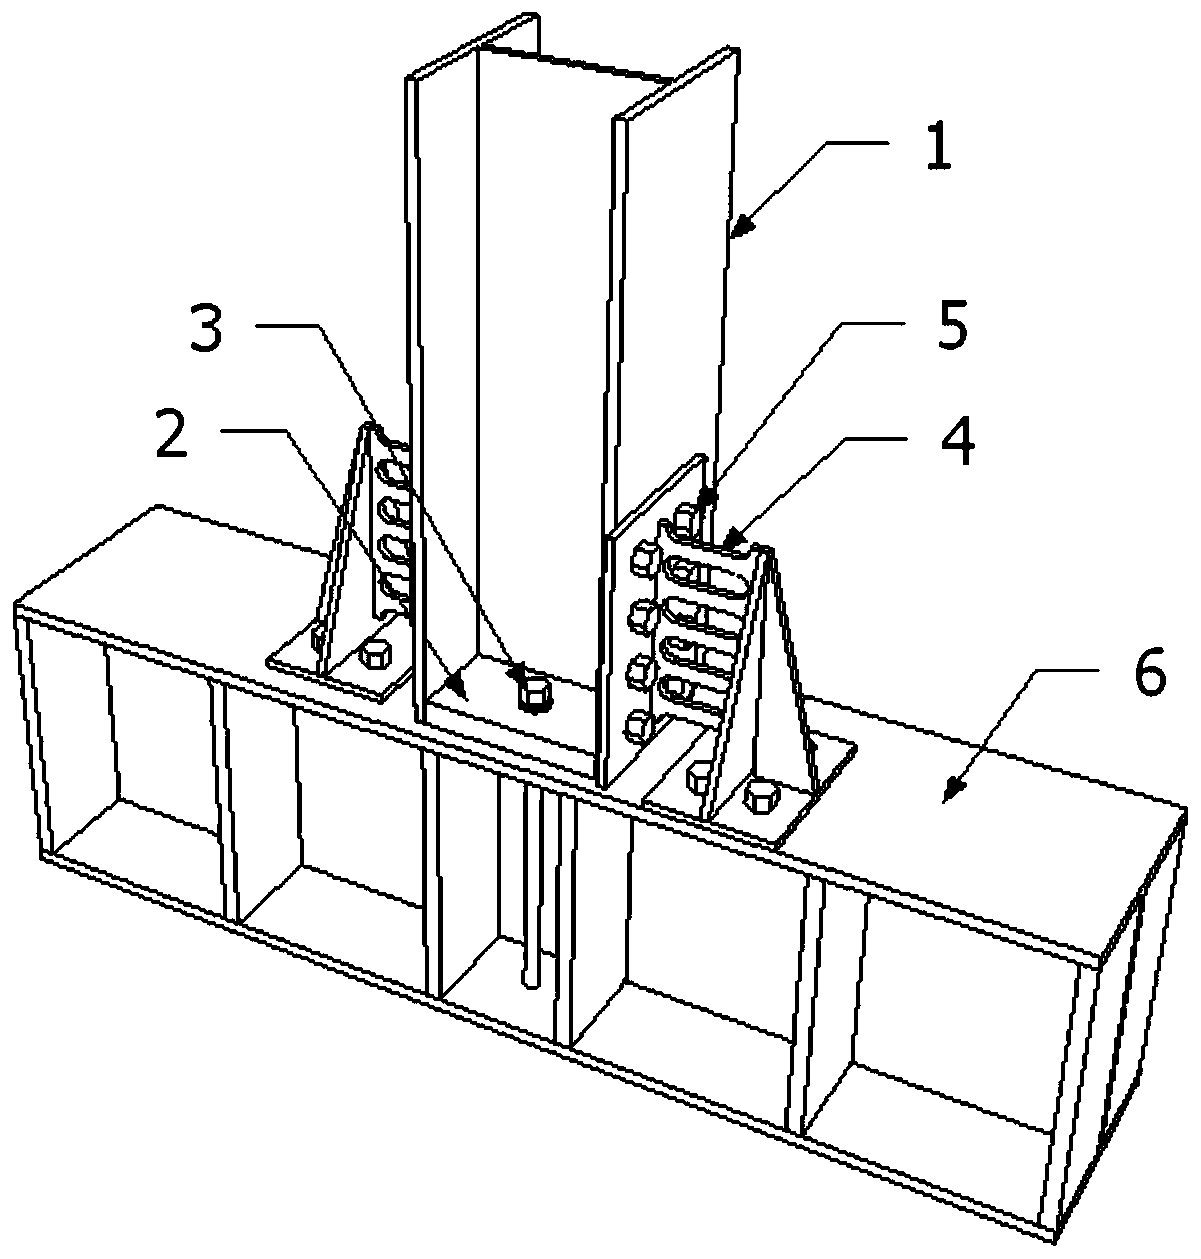 Assembled steel column base with controllable damage